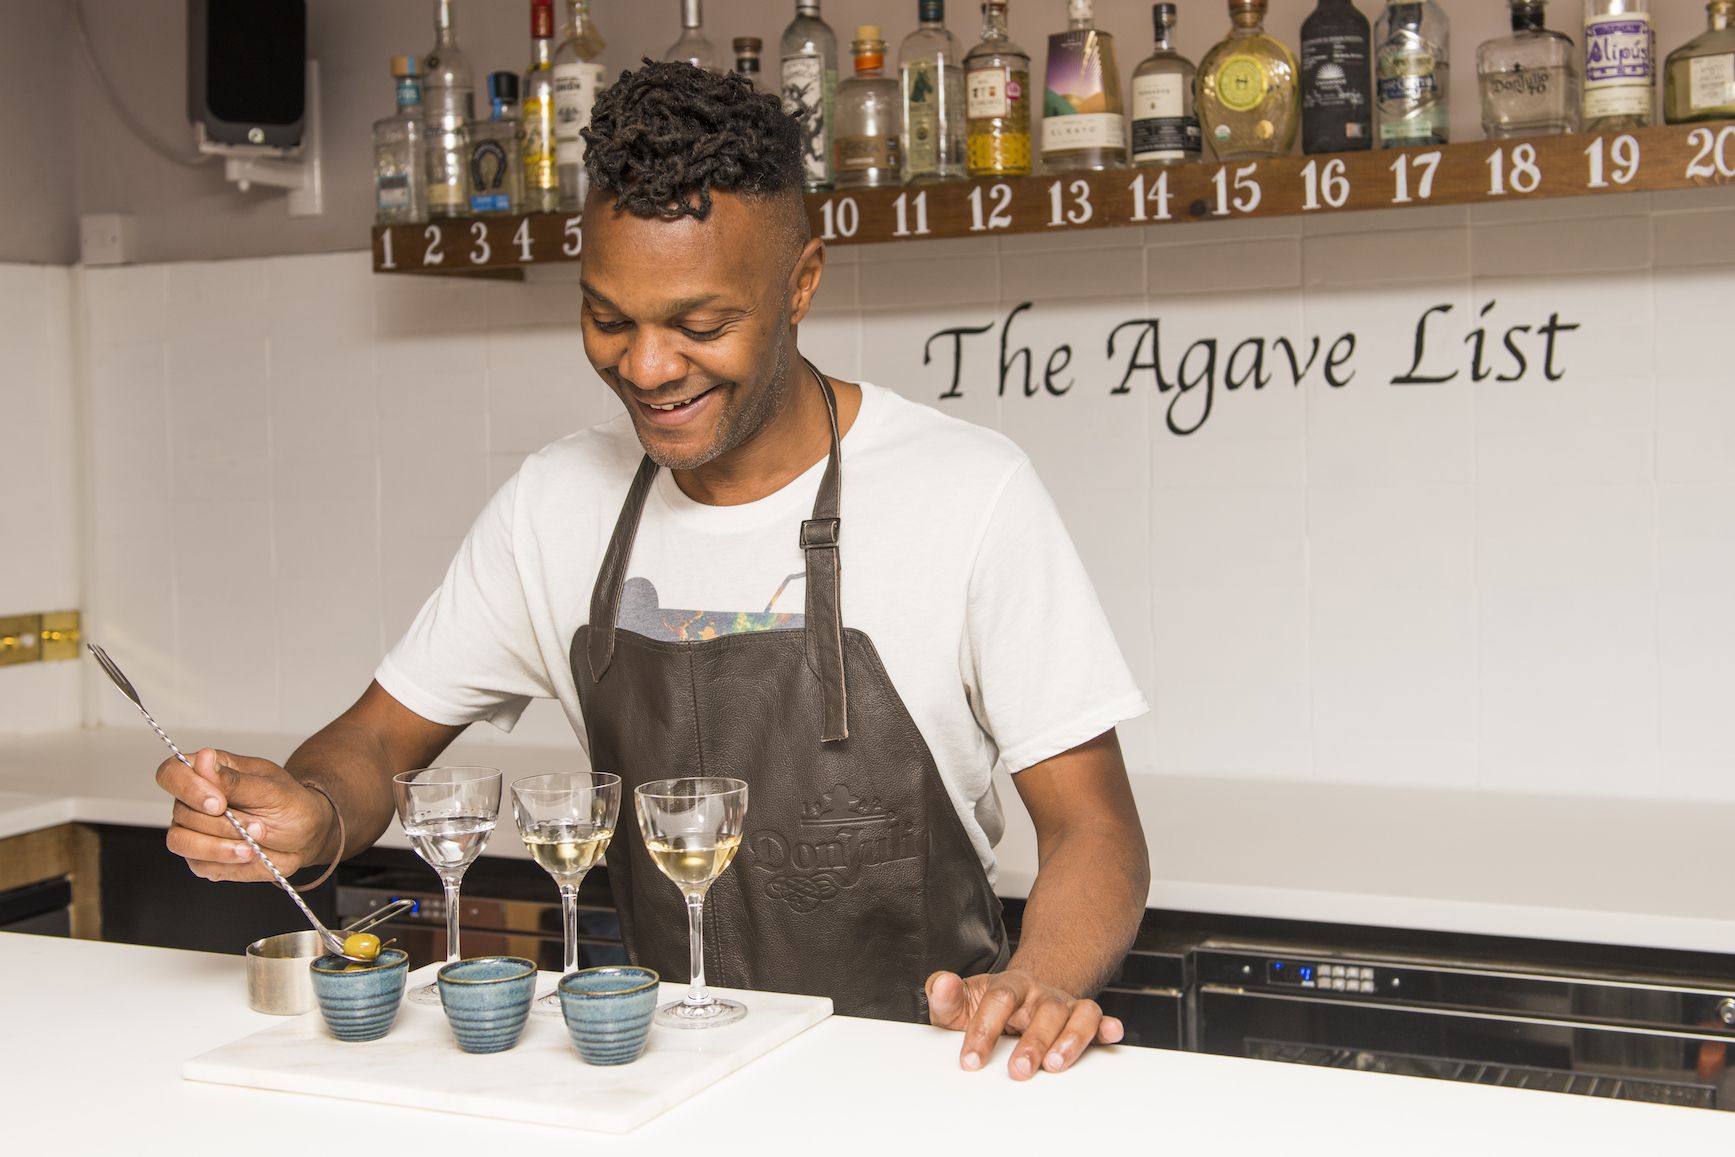 How Hacha Bar wants to prove ‘less is more’ with agave spirits